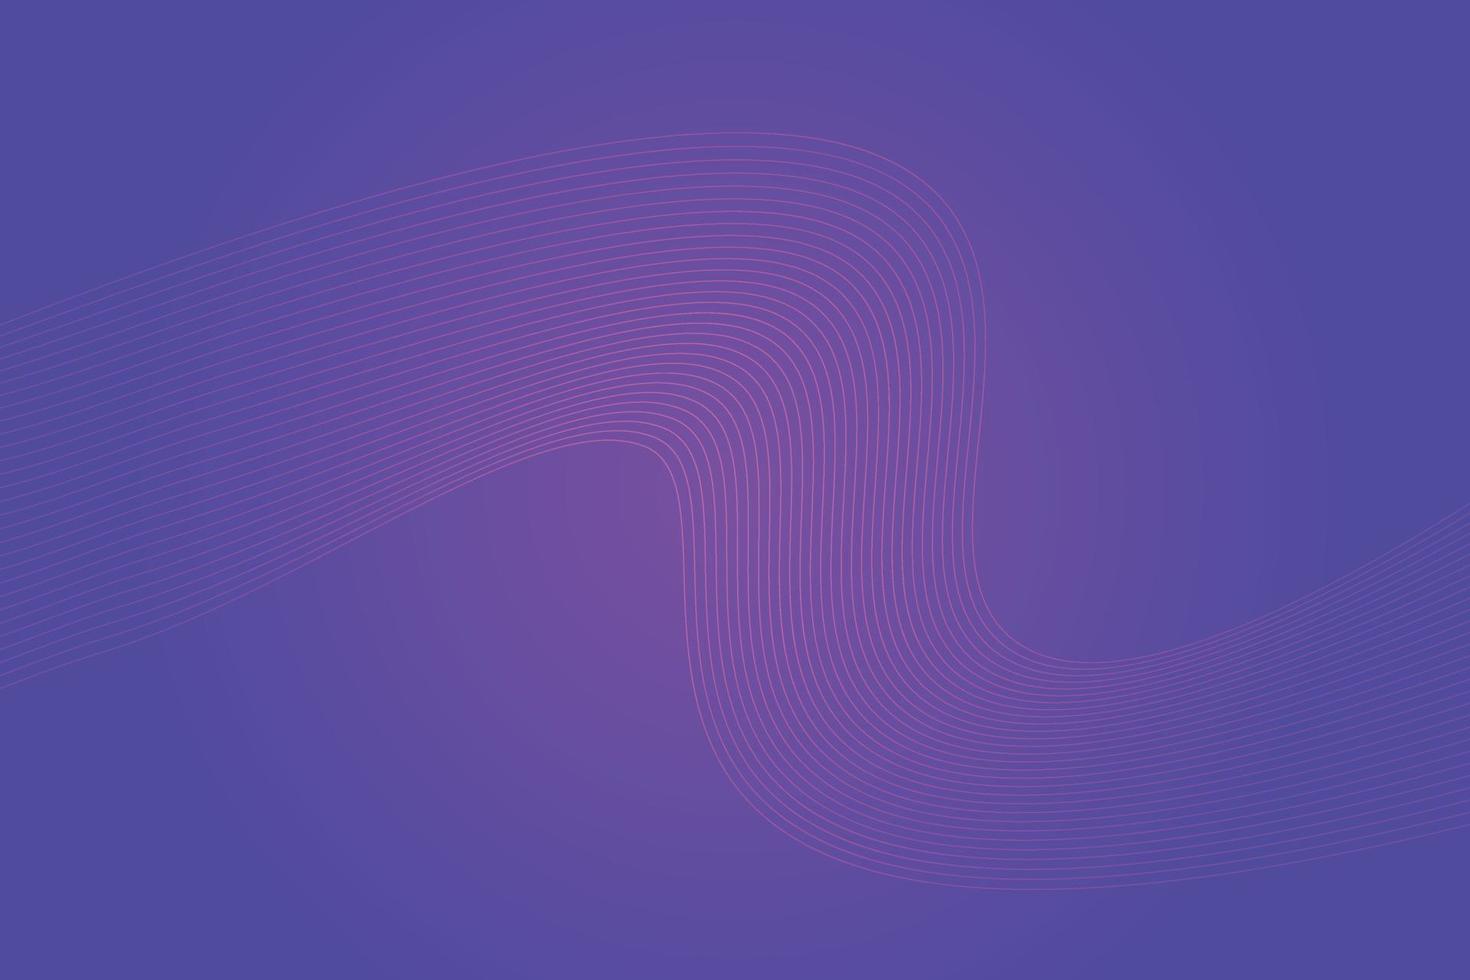 Abstract background with colorful wavy lines. Abstract Purple gradient background design vector